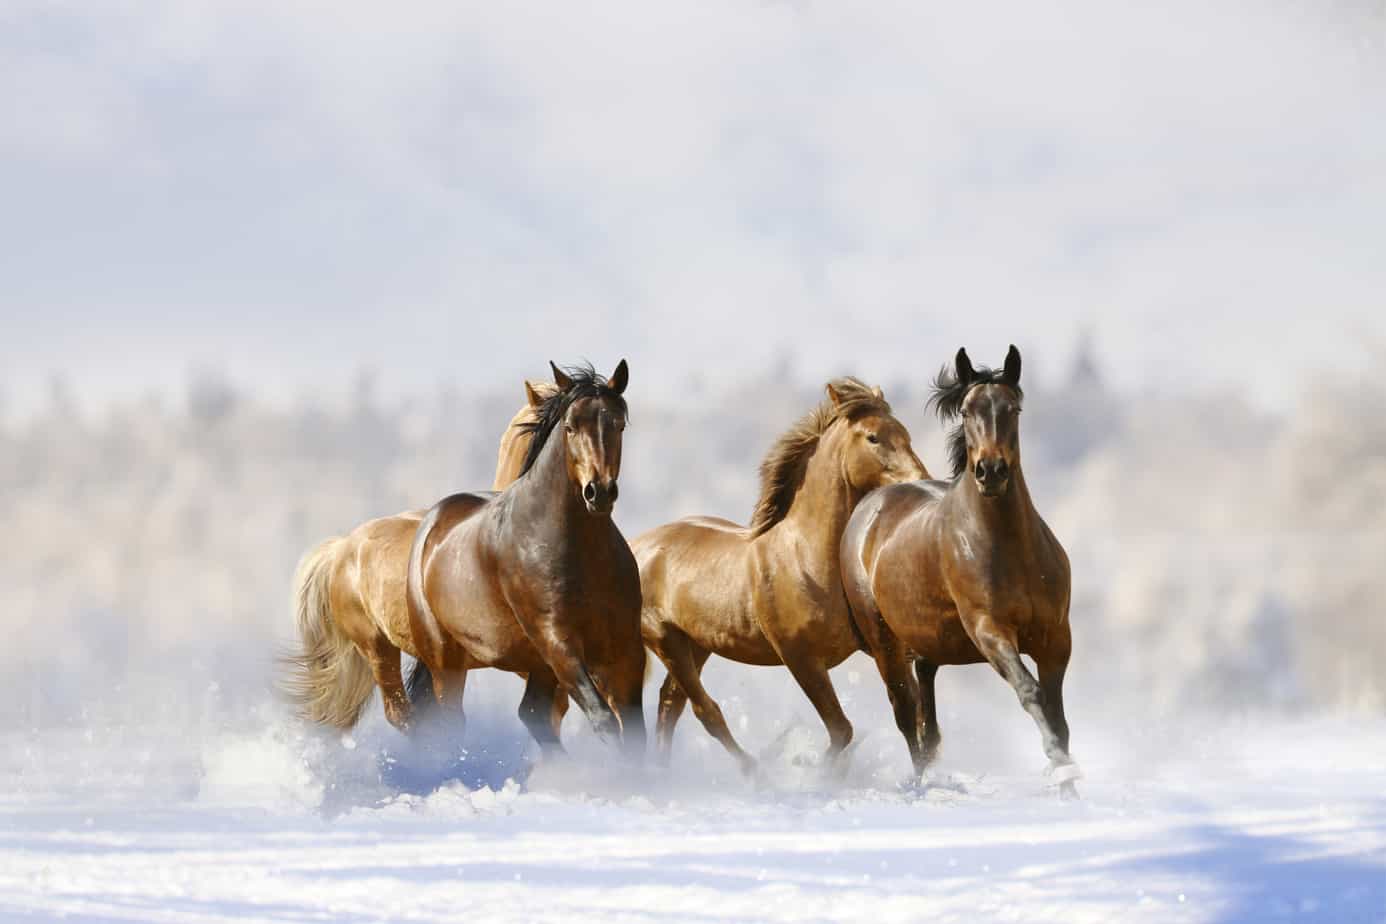 For the love of horses! They make us dream about freedom, power and friendship.you do not eat your friend.